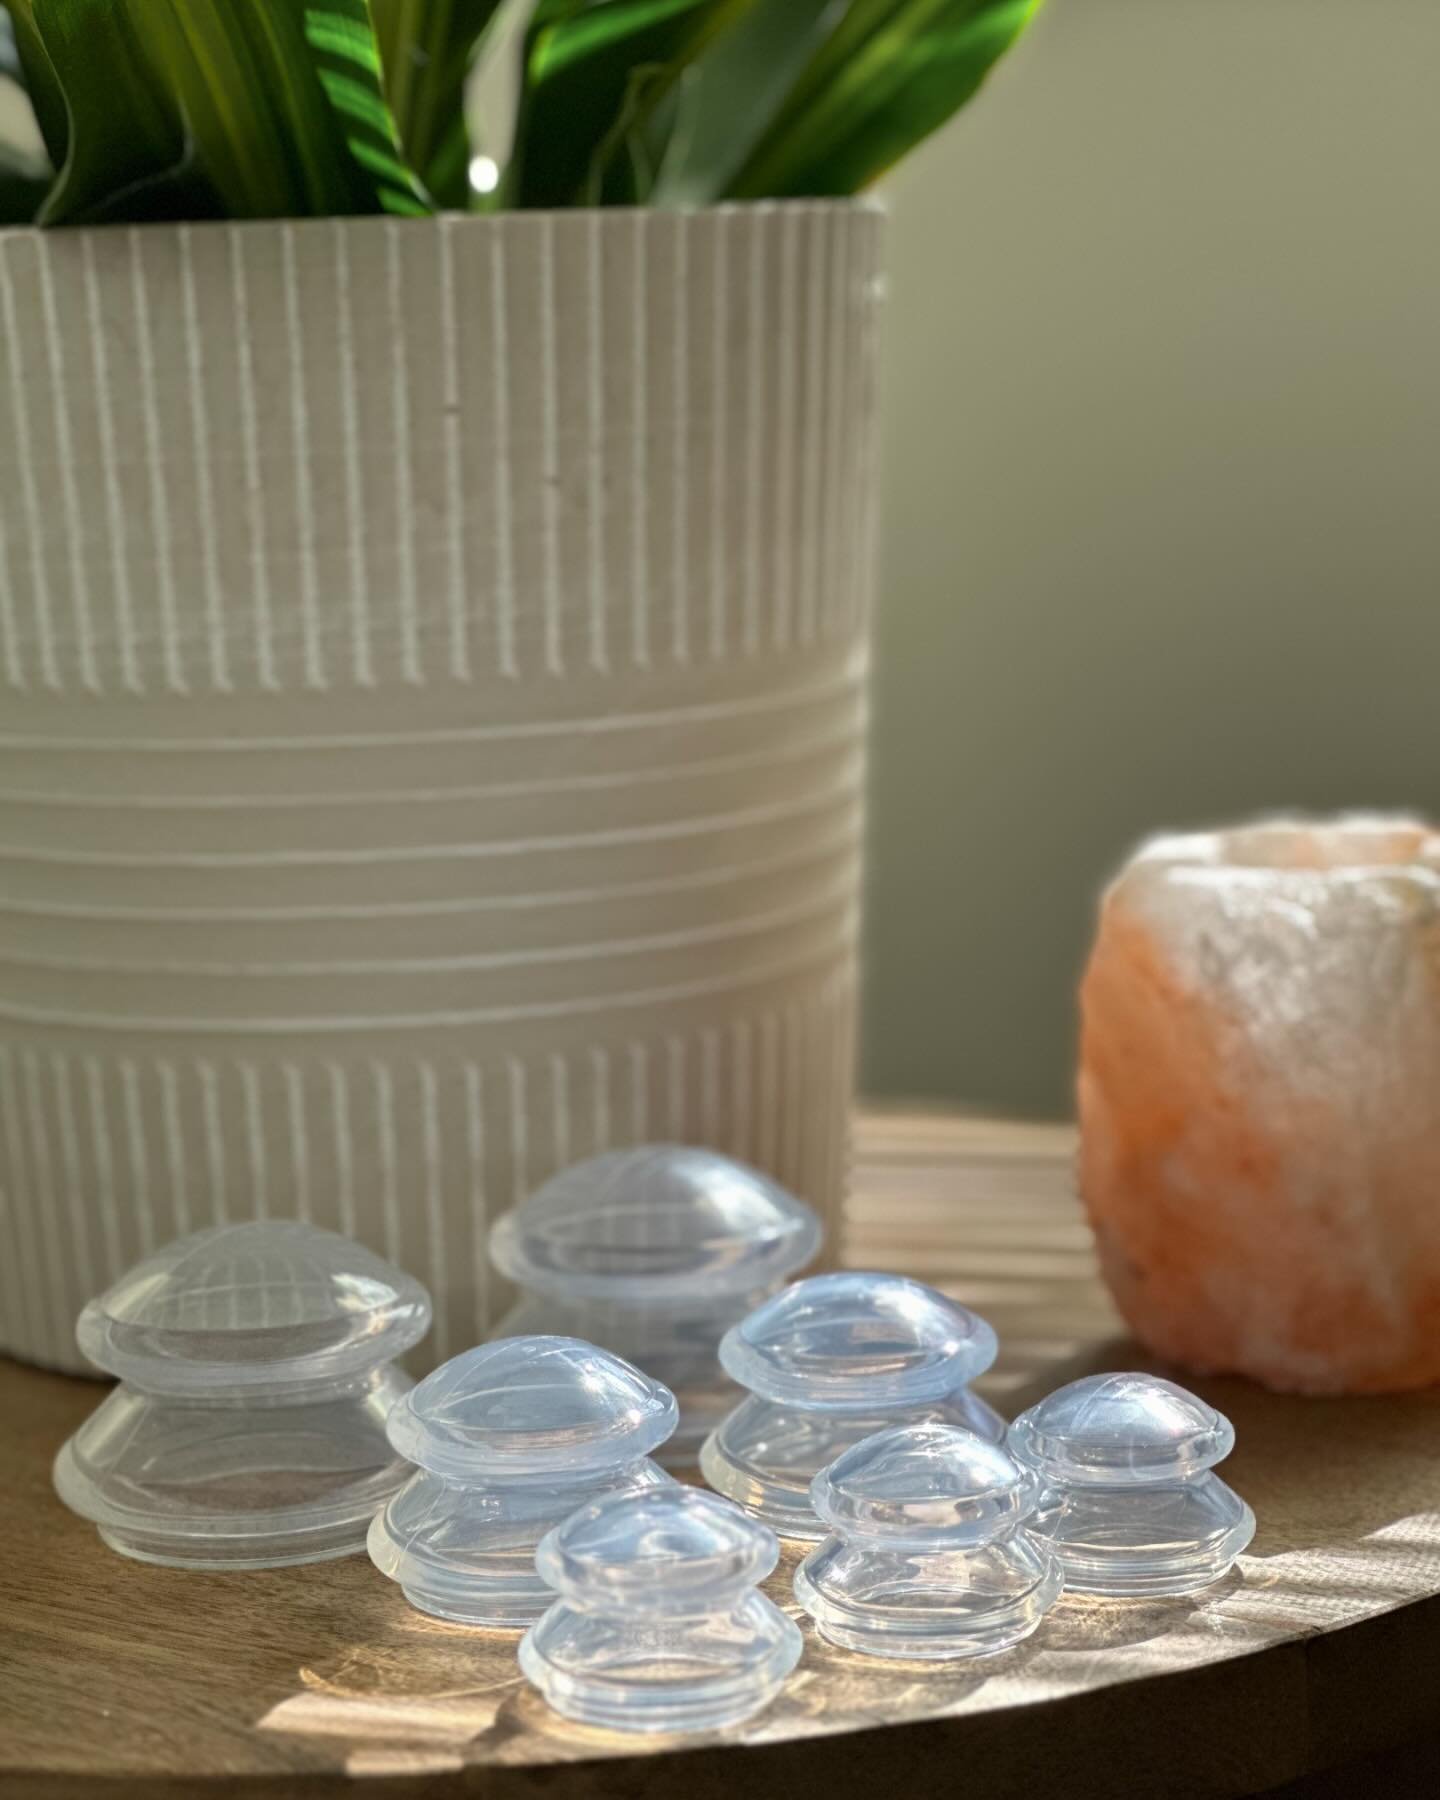 Adding cupping to a massage can offer several benefits. Cupping can help increase blood flow, reduce muscle tension, and promote relaxation. It can also help release fascia, the connective tissue around muscles, and reduce inflammation. Many people f